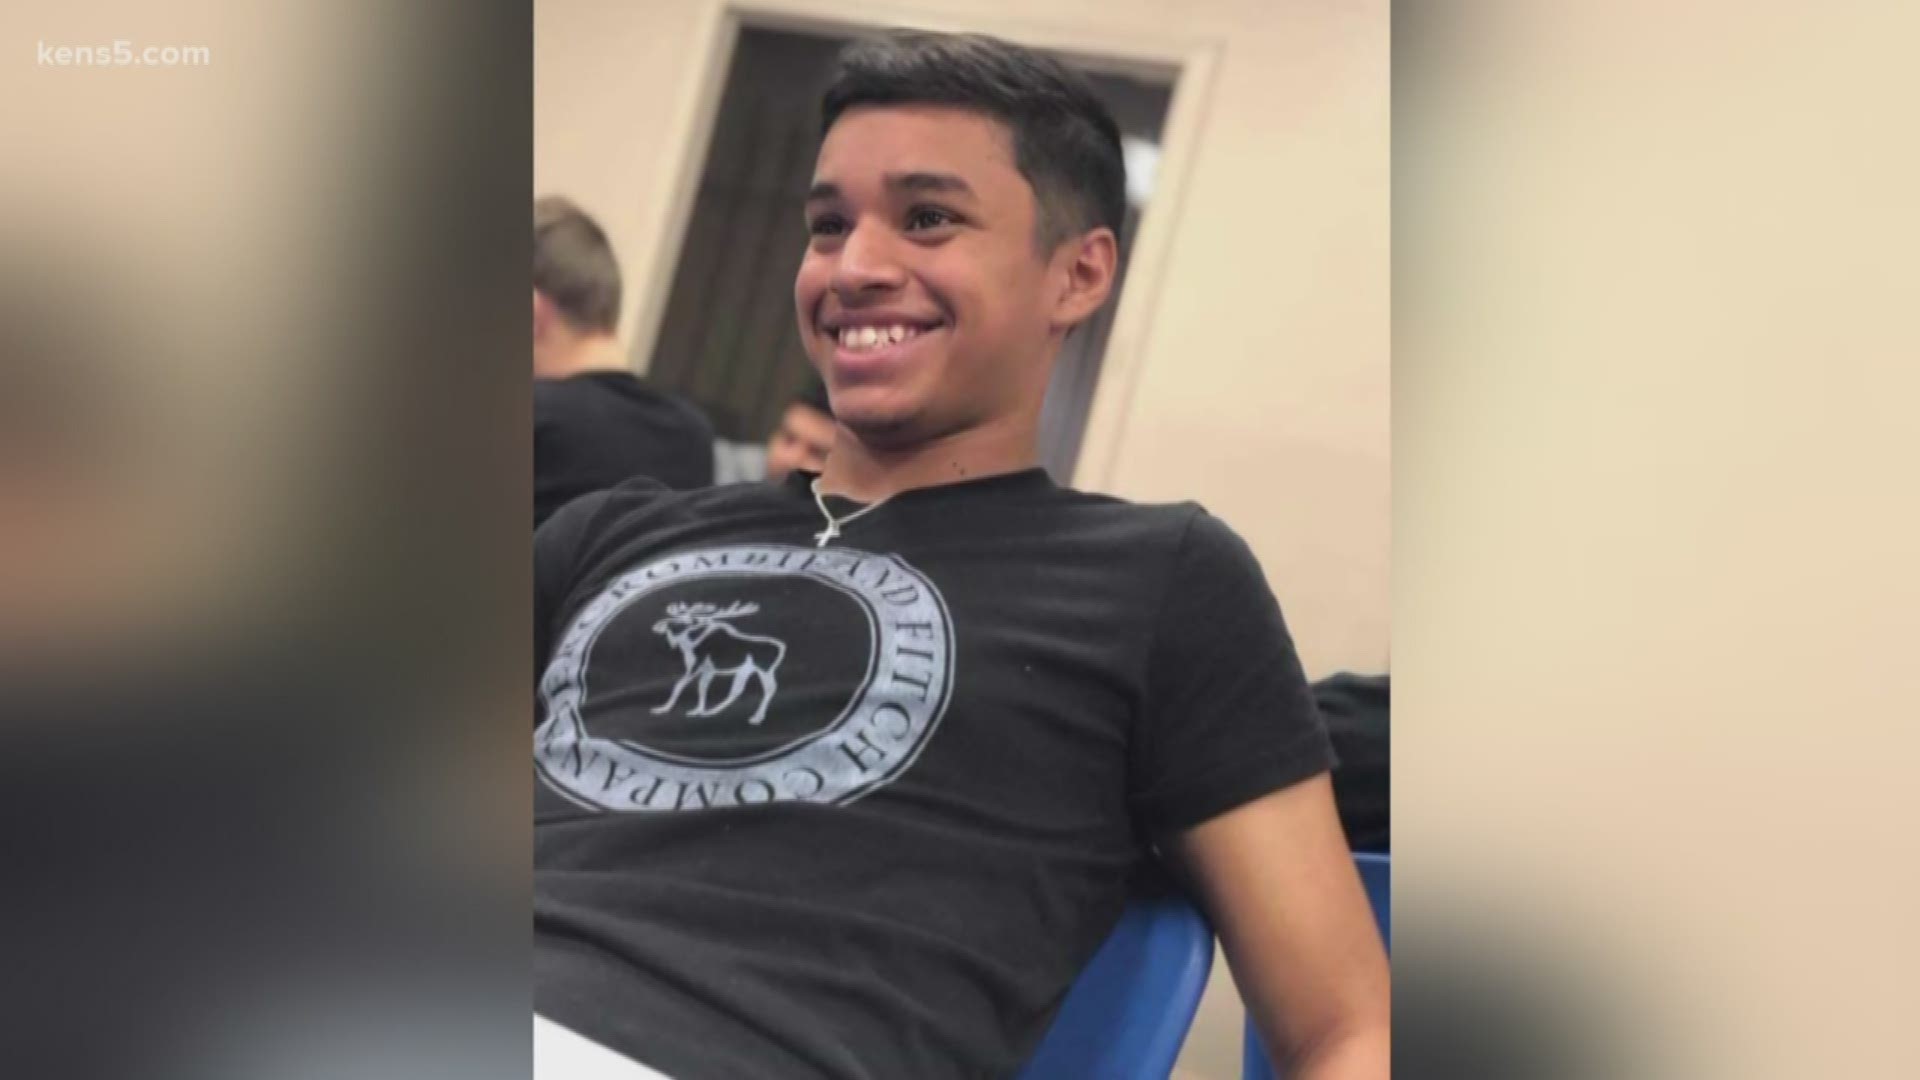 The 18-year-old was still paralyzed from the shoulders down on Thursday, as the community continues to rally around him.